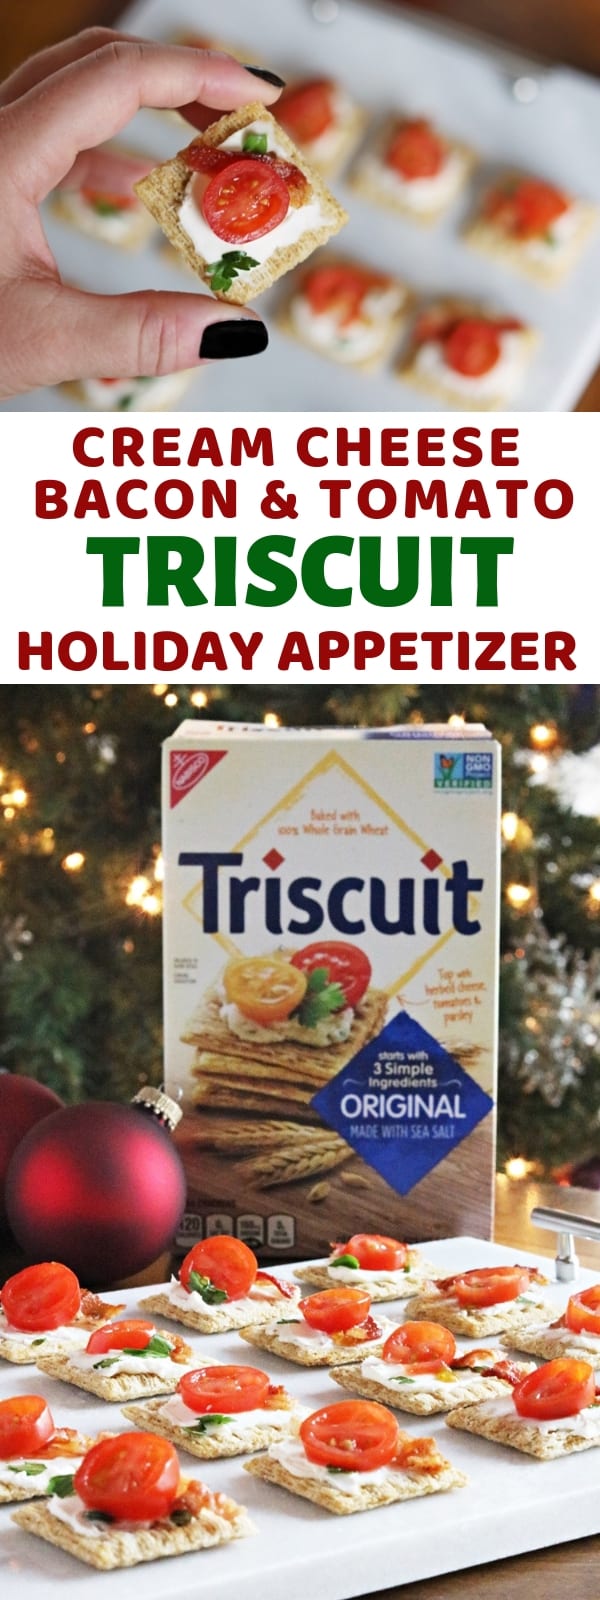 Top Triscuit crackers with cream cheese, bacon, and tomato for an easy holiday appetizer that takes just 10 minutes to prepare!